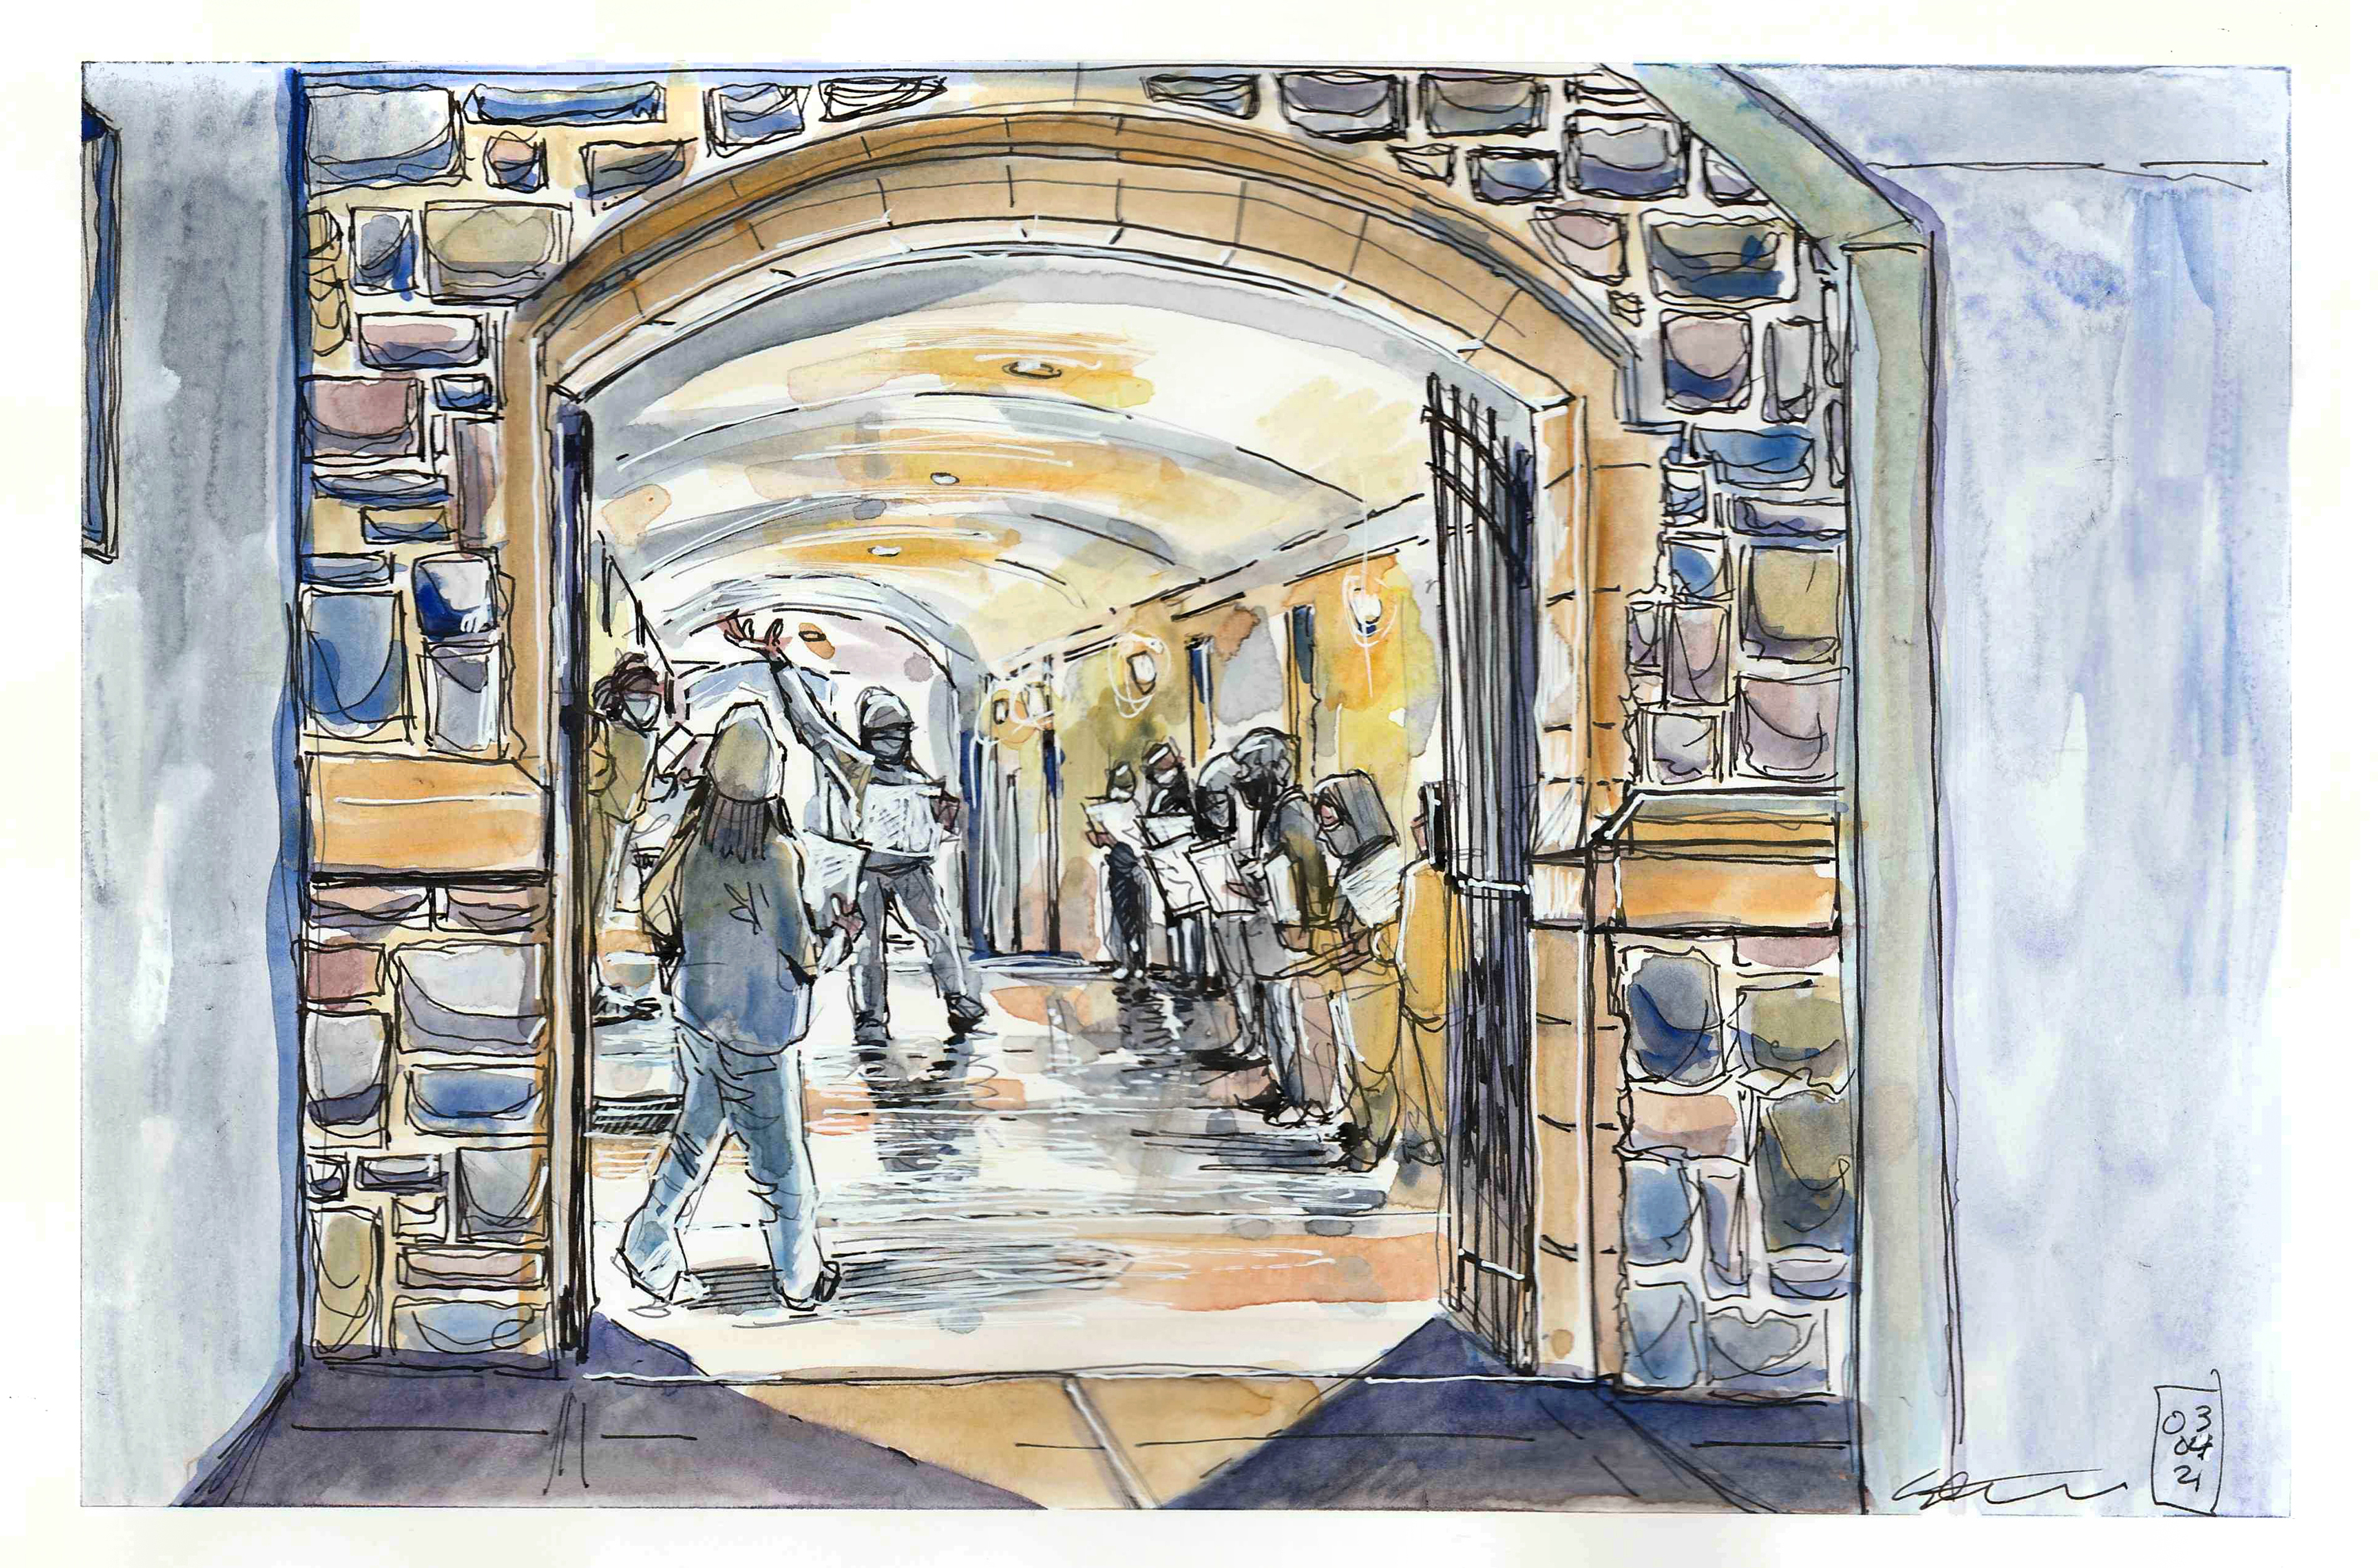 Illustrated ink and watercolor sketch of students singing in Burruss Tunnel